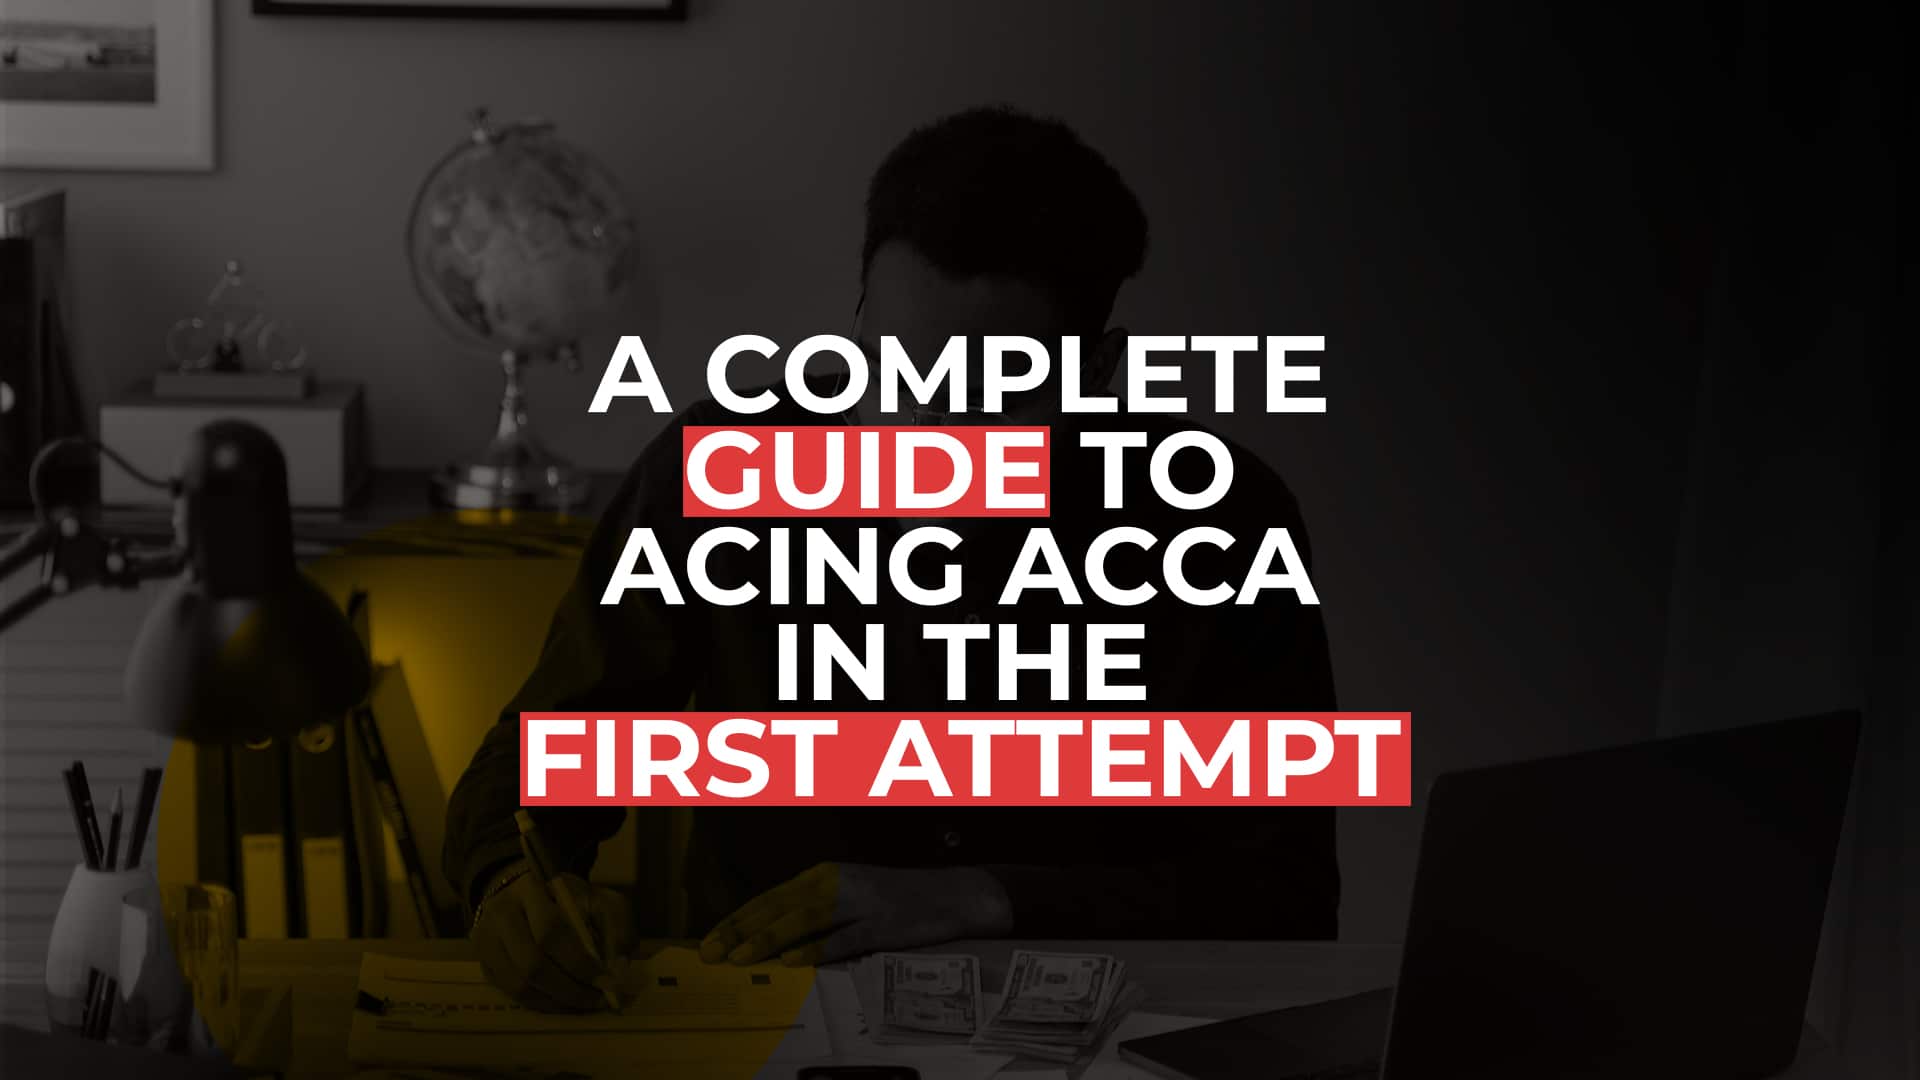 ACCA Note and Mock Exam